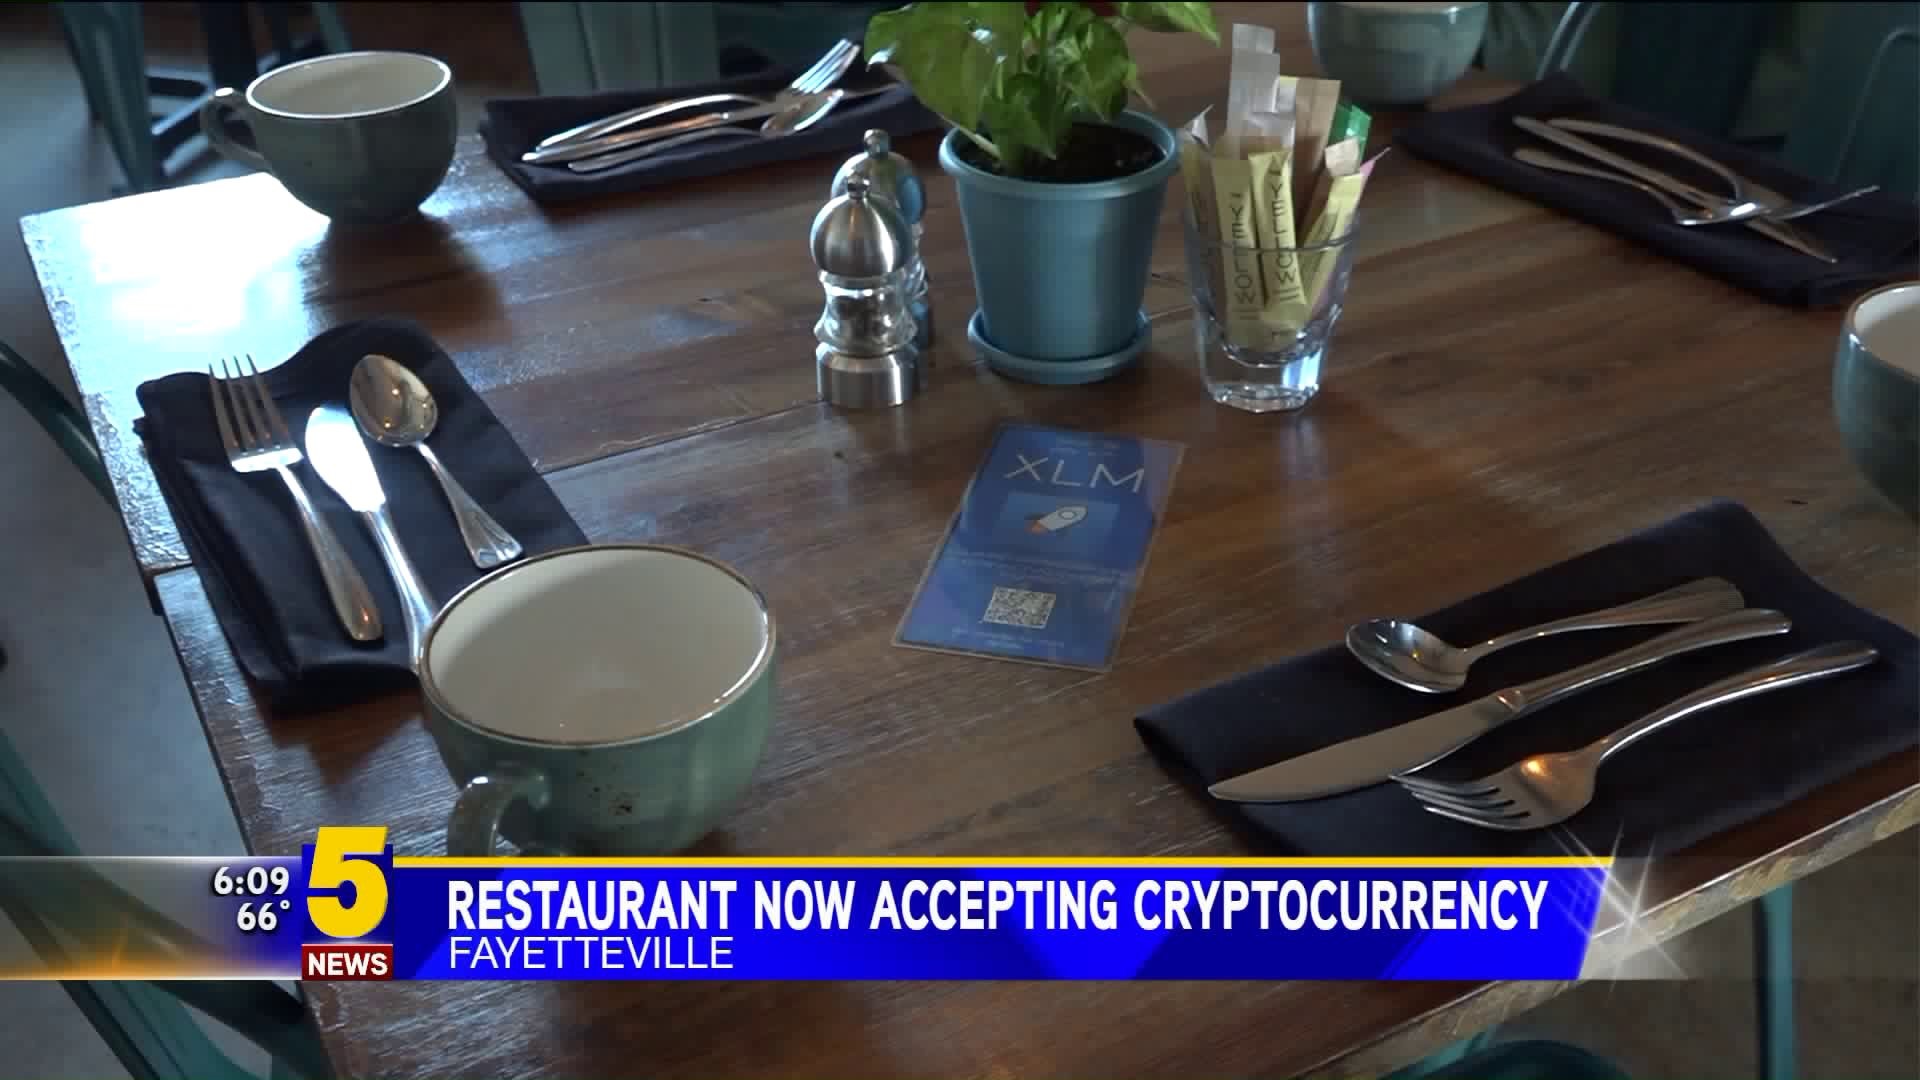 Restaurant Now Accepting Cryptocurrency